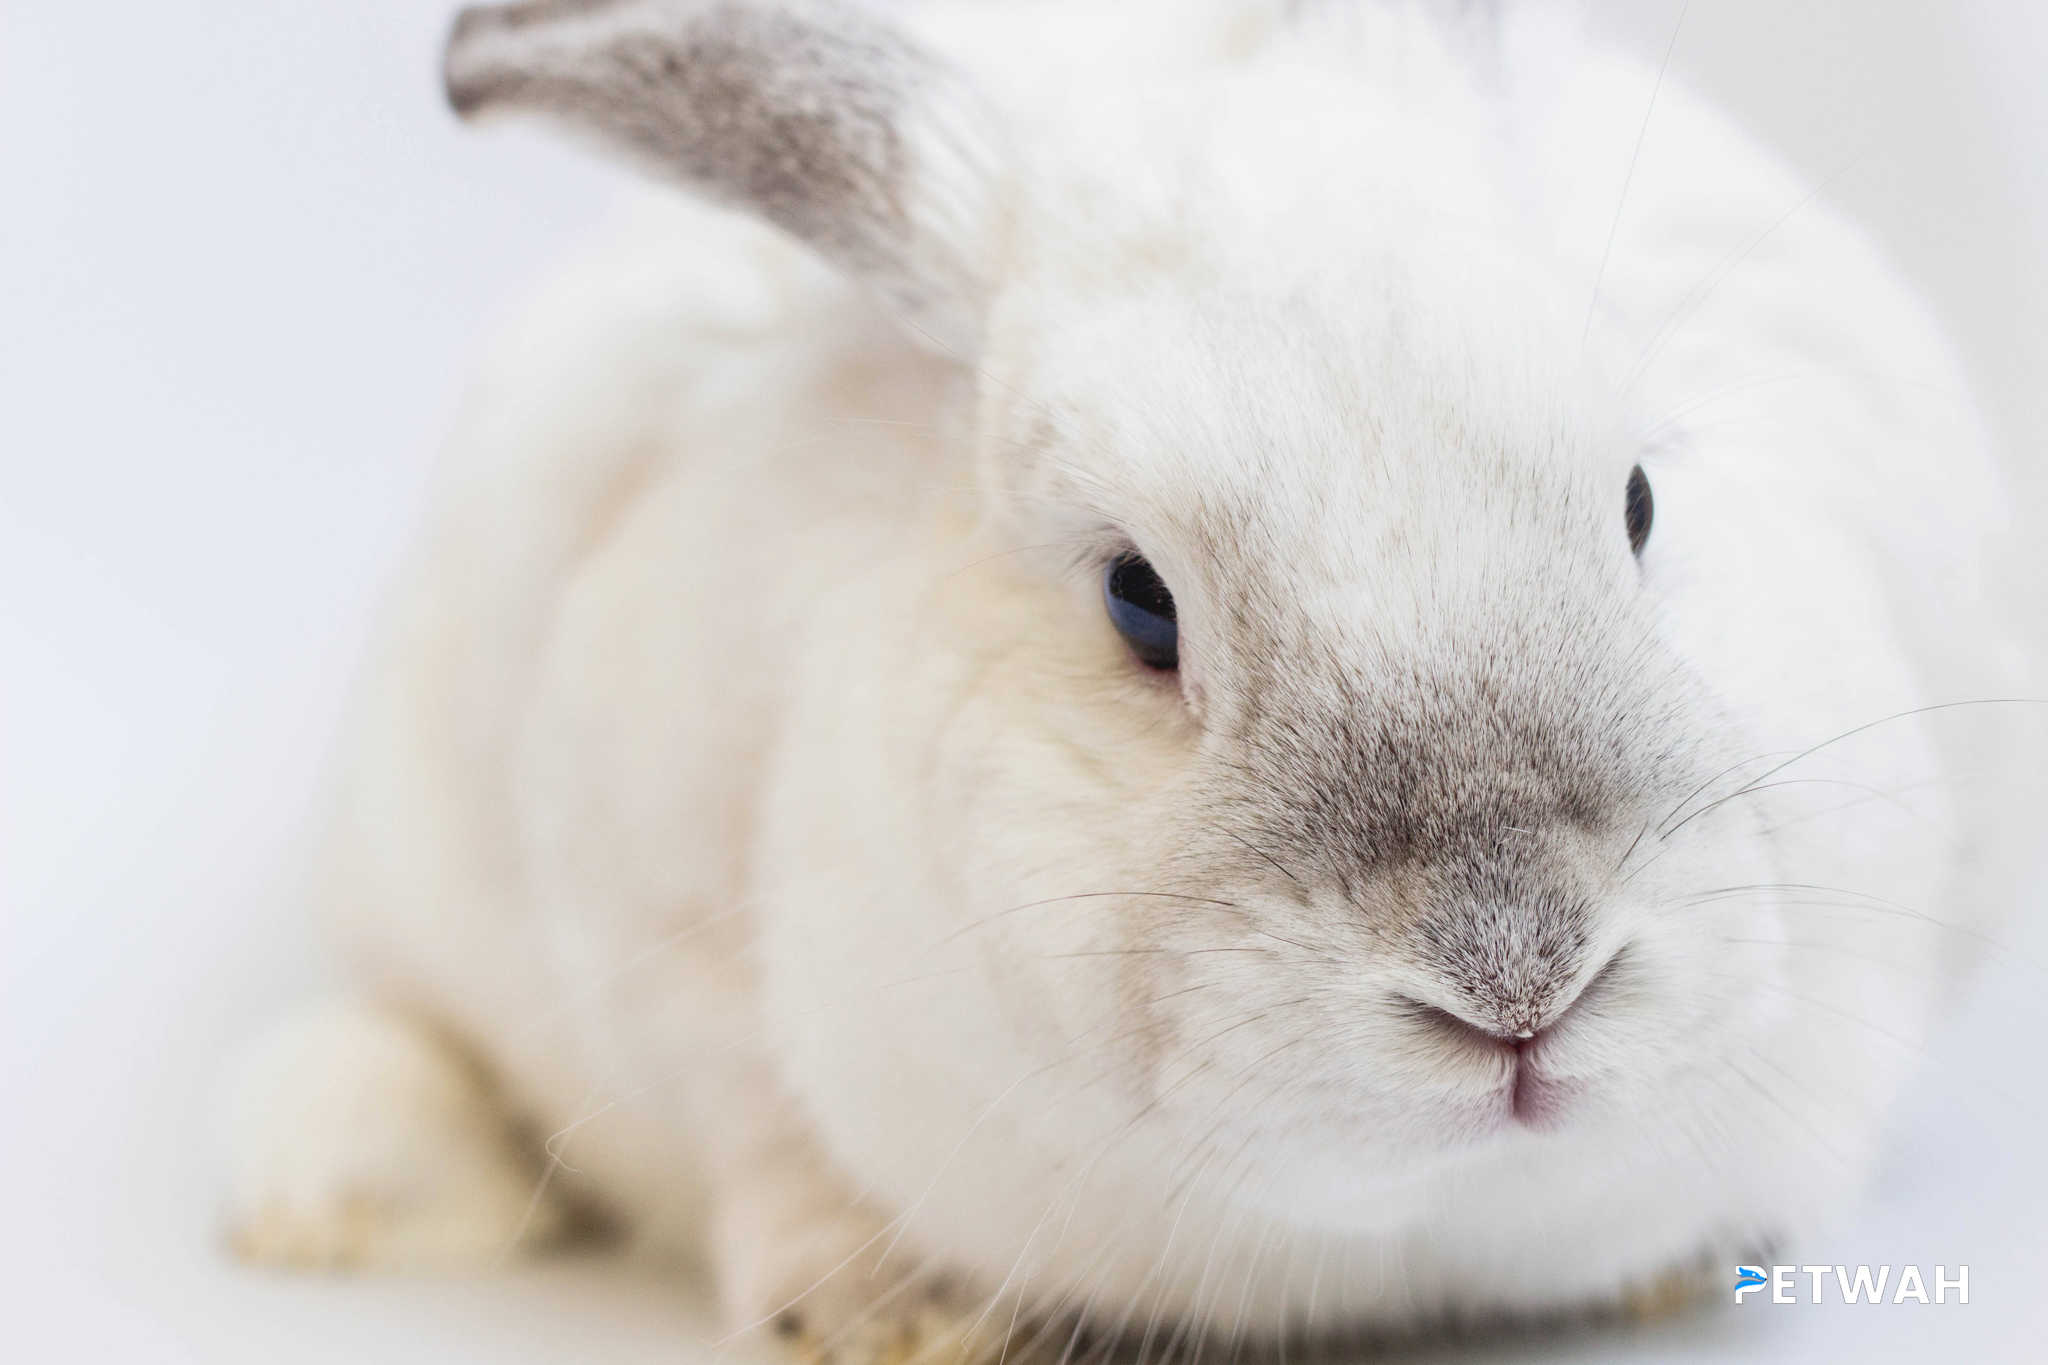 Incorporating Your Pet Rabbit into Daily Activities Safely